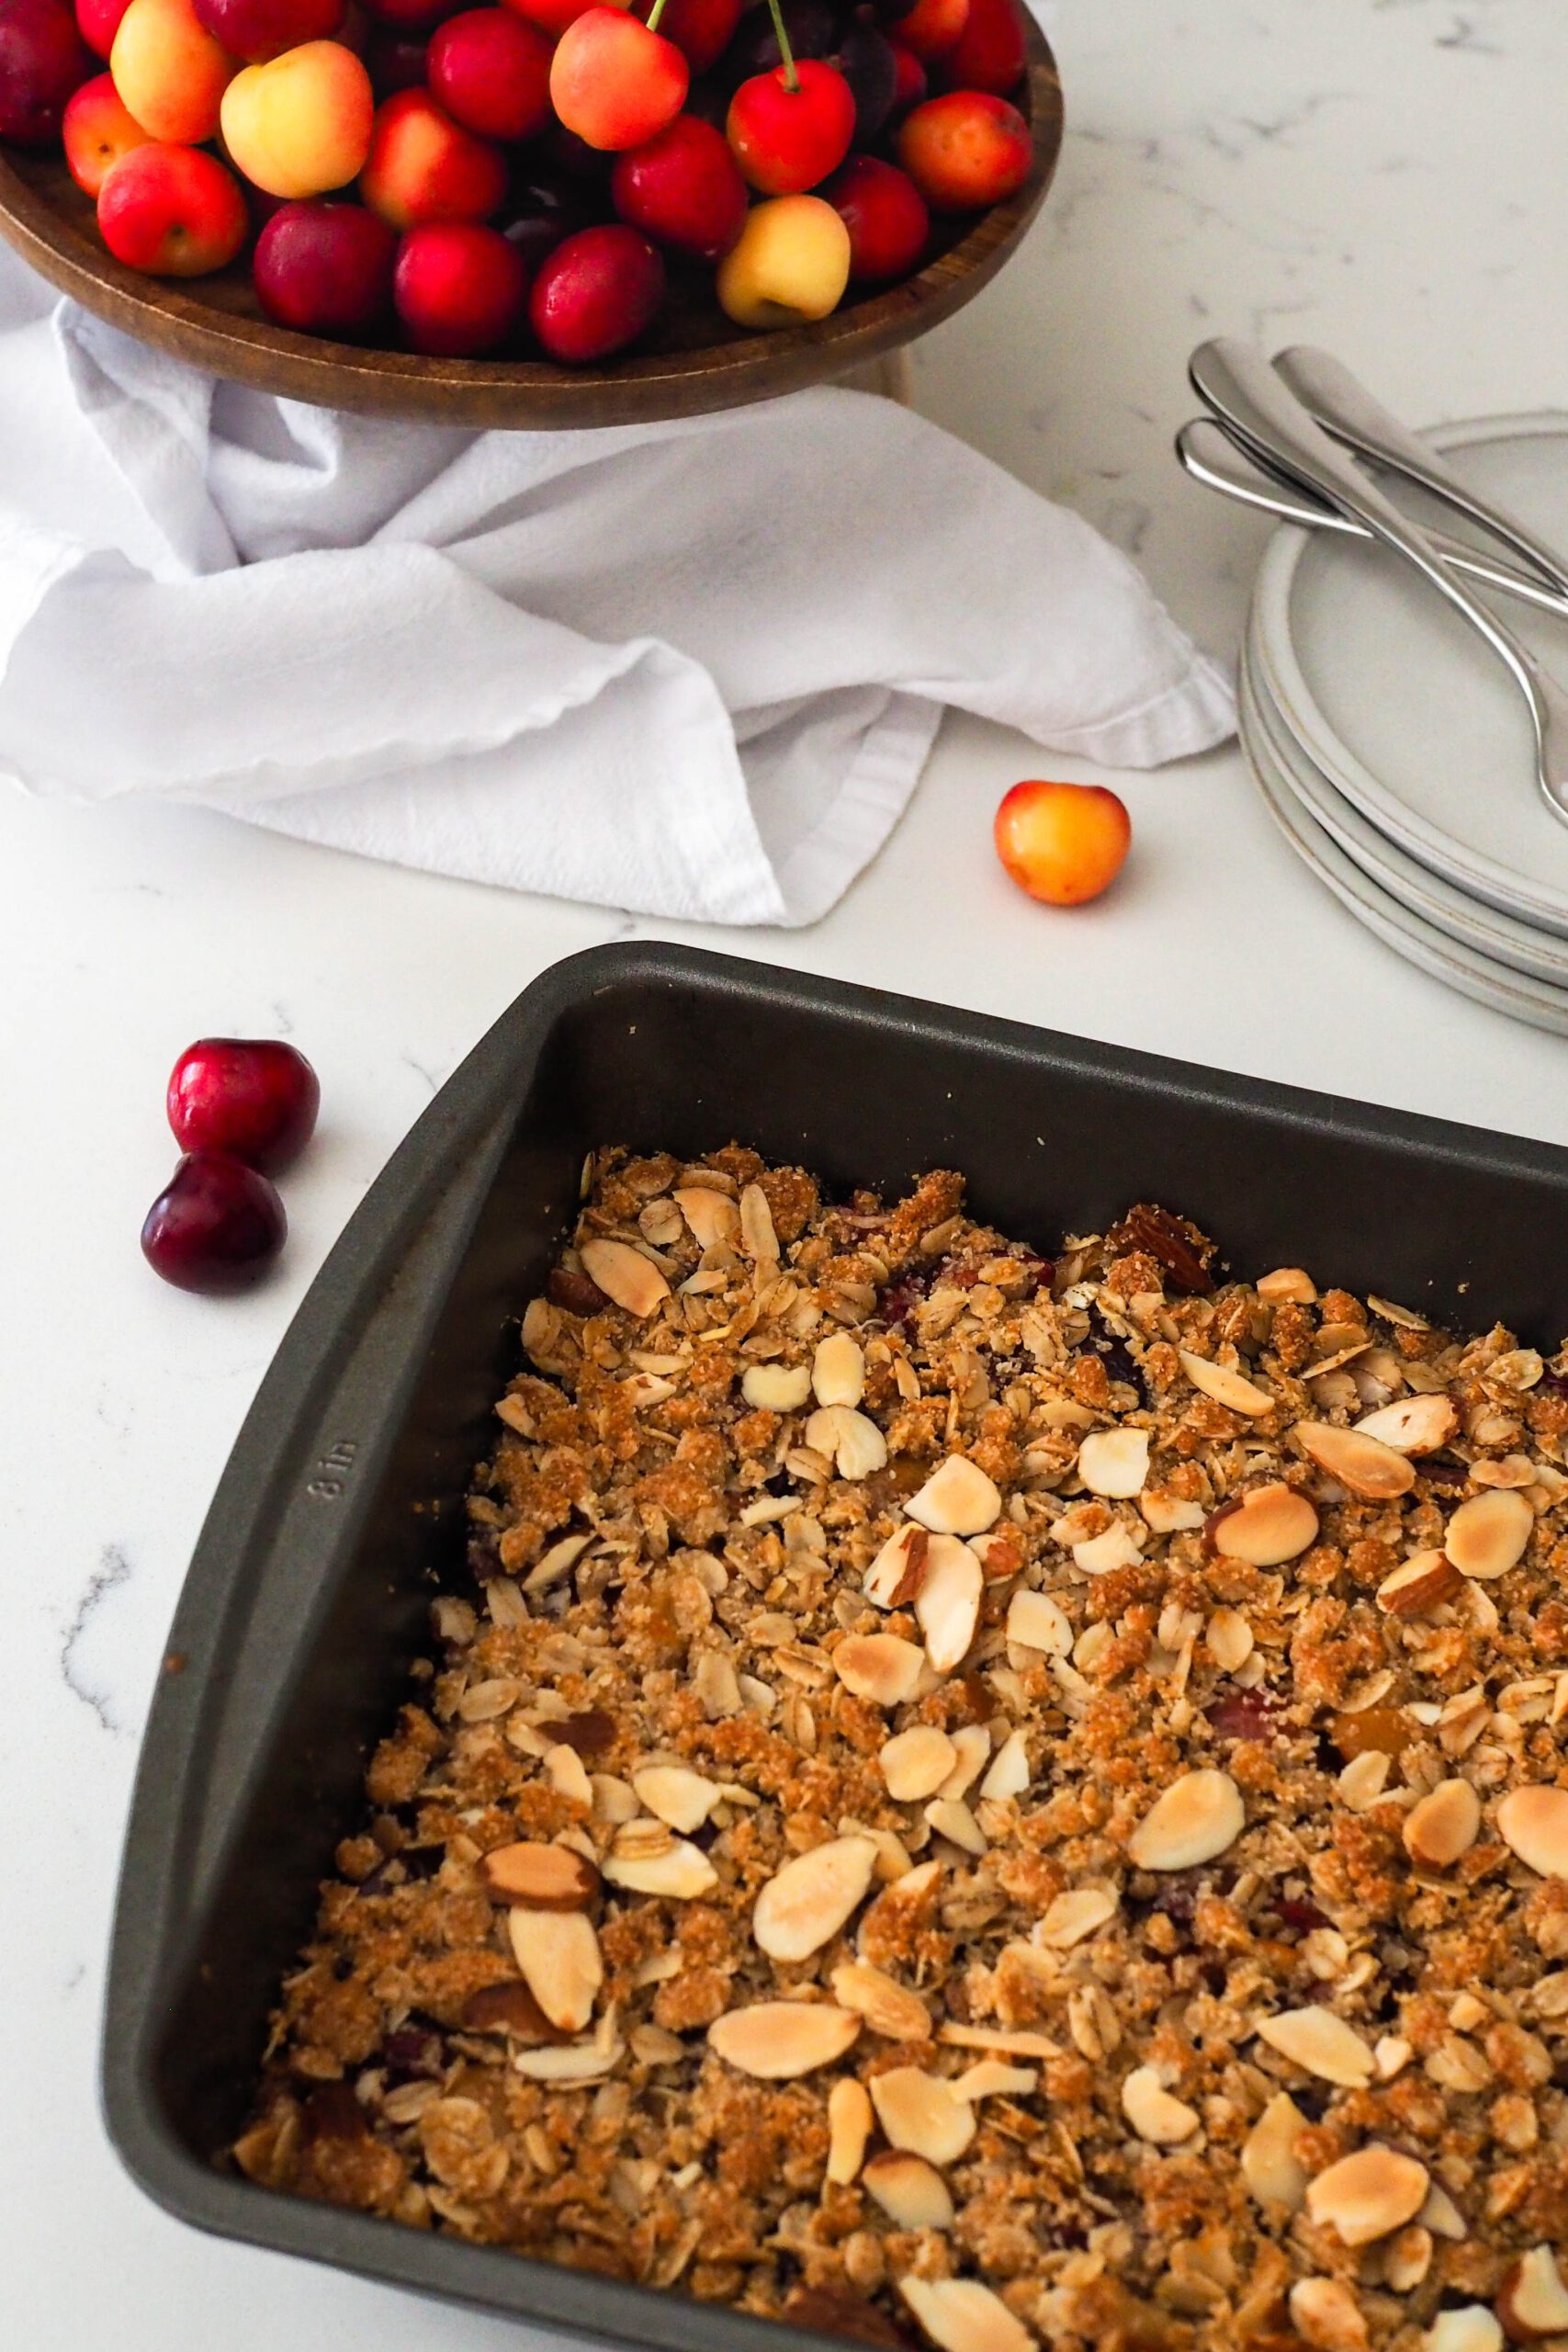 Baked gluten-free cherry almond crumble in a pan fresh out of the oven.